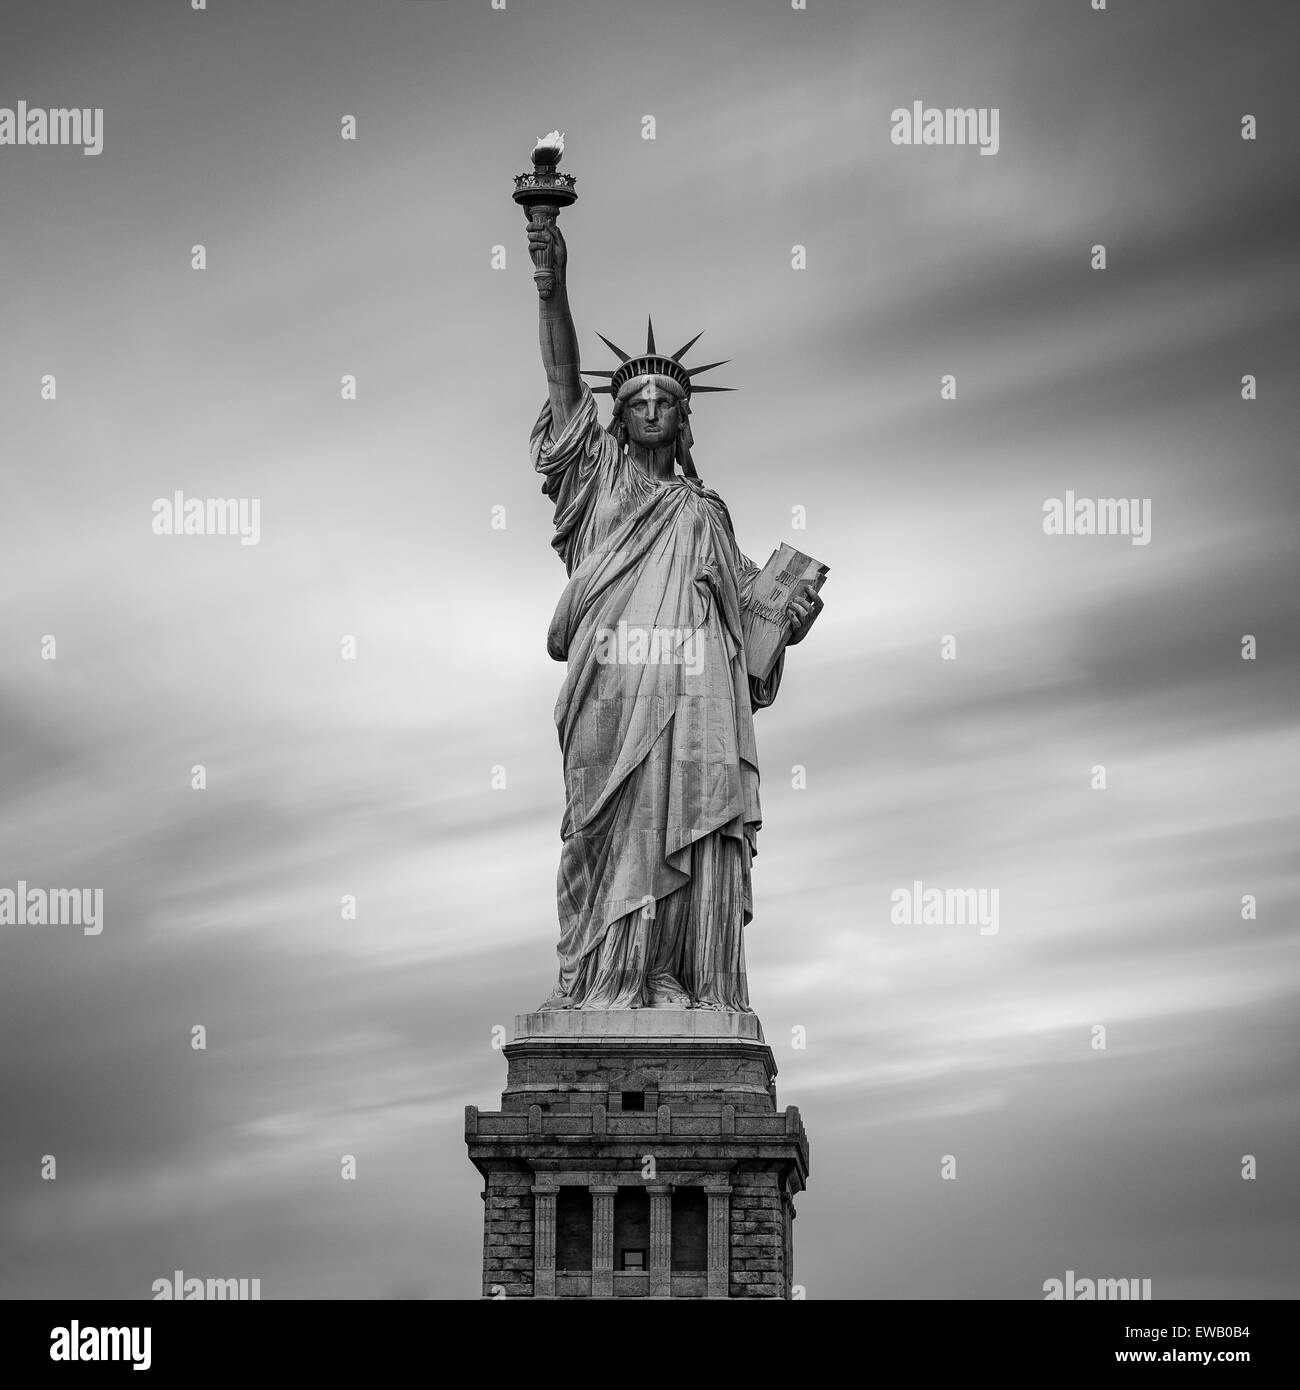 The Statue of Liberty in New York City, USA. Stock Photo